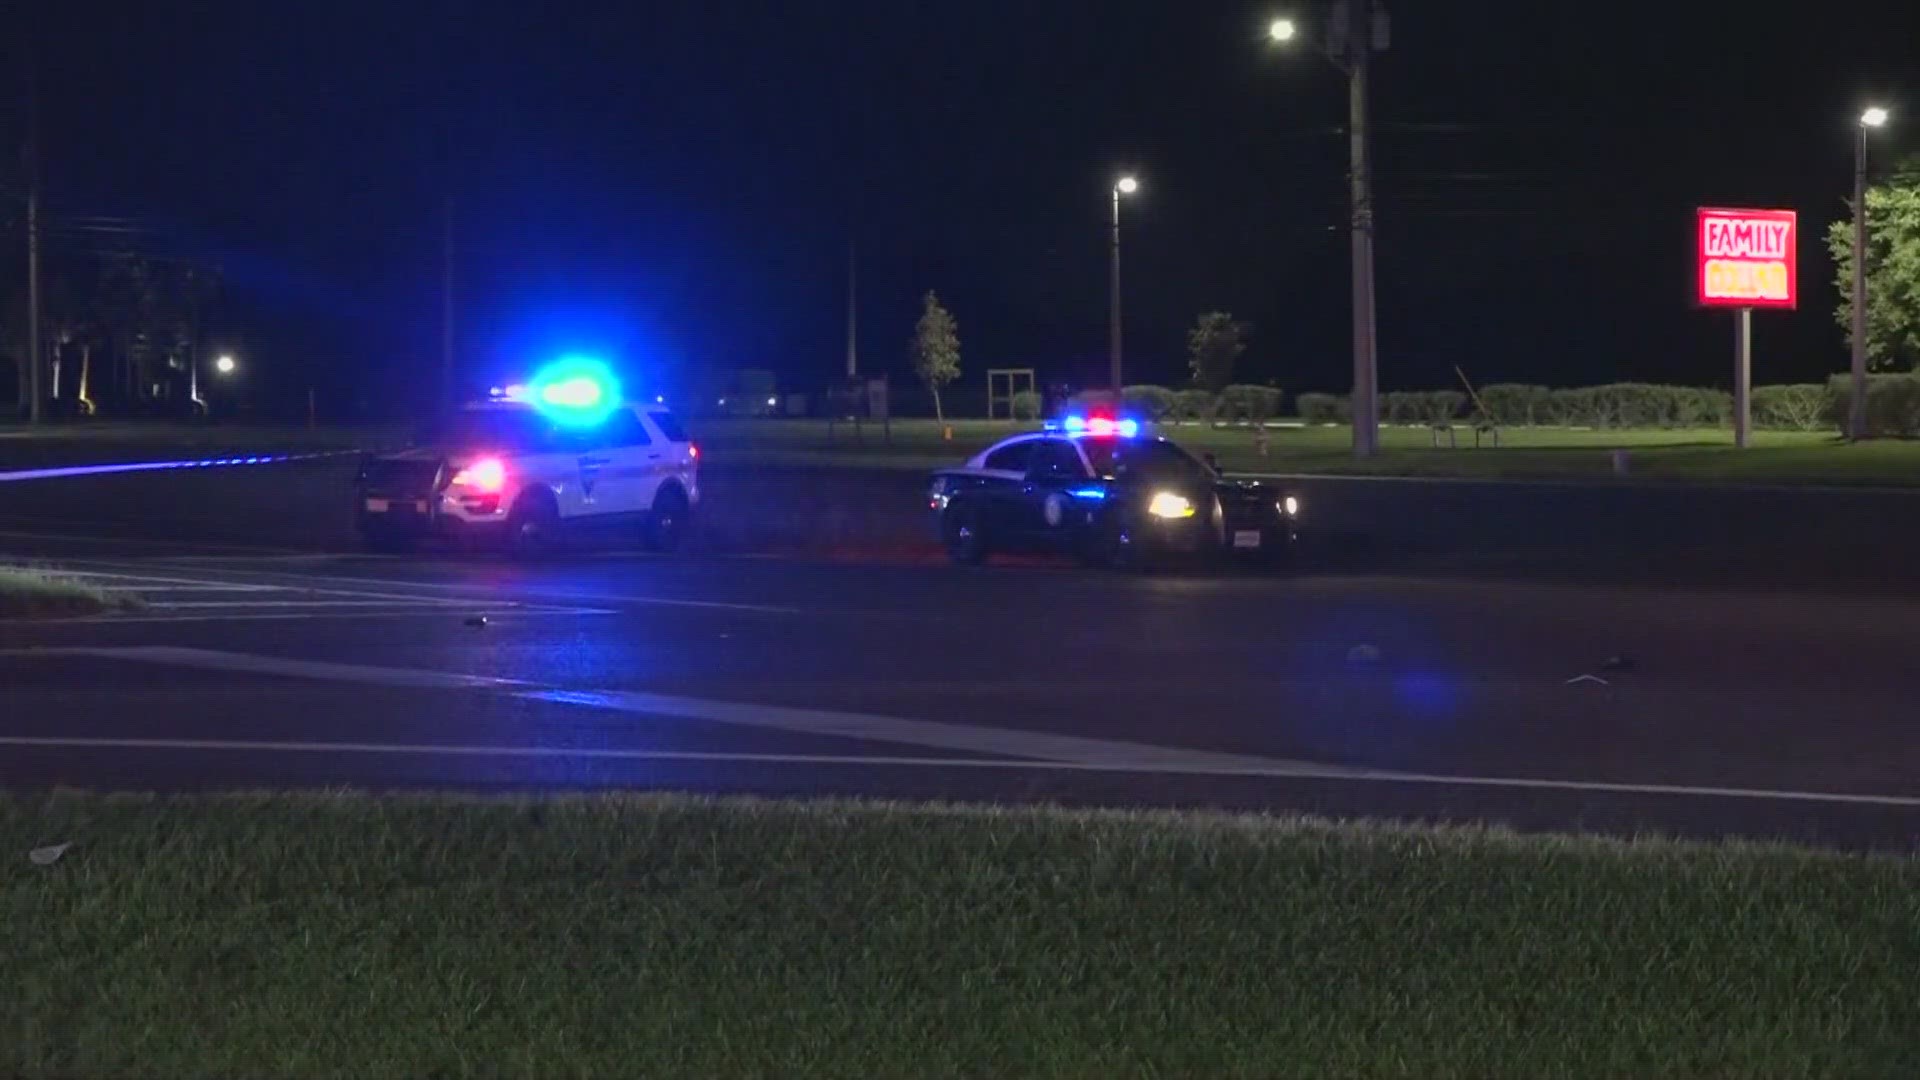 A 45-year-old woman and 32-year-old woman were both killed in the crash. The driver of the vehicle was not injured, according to the Florida Highway Patrol.